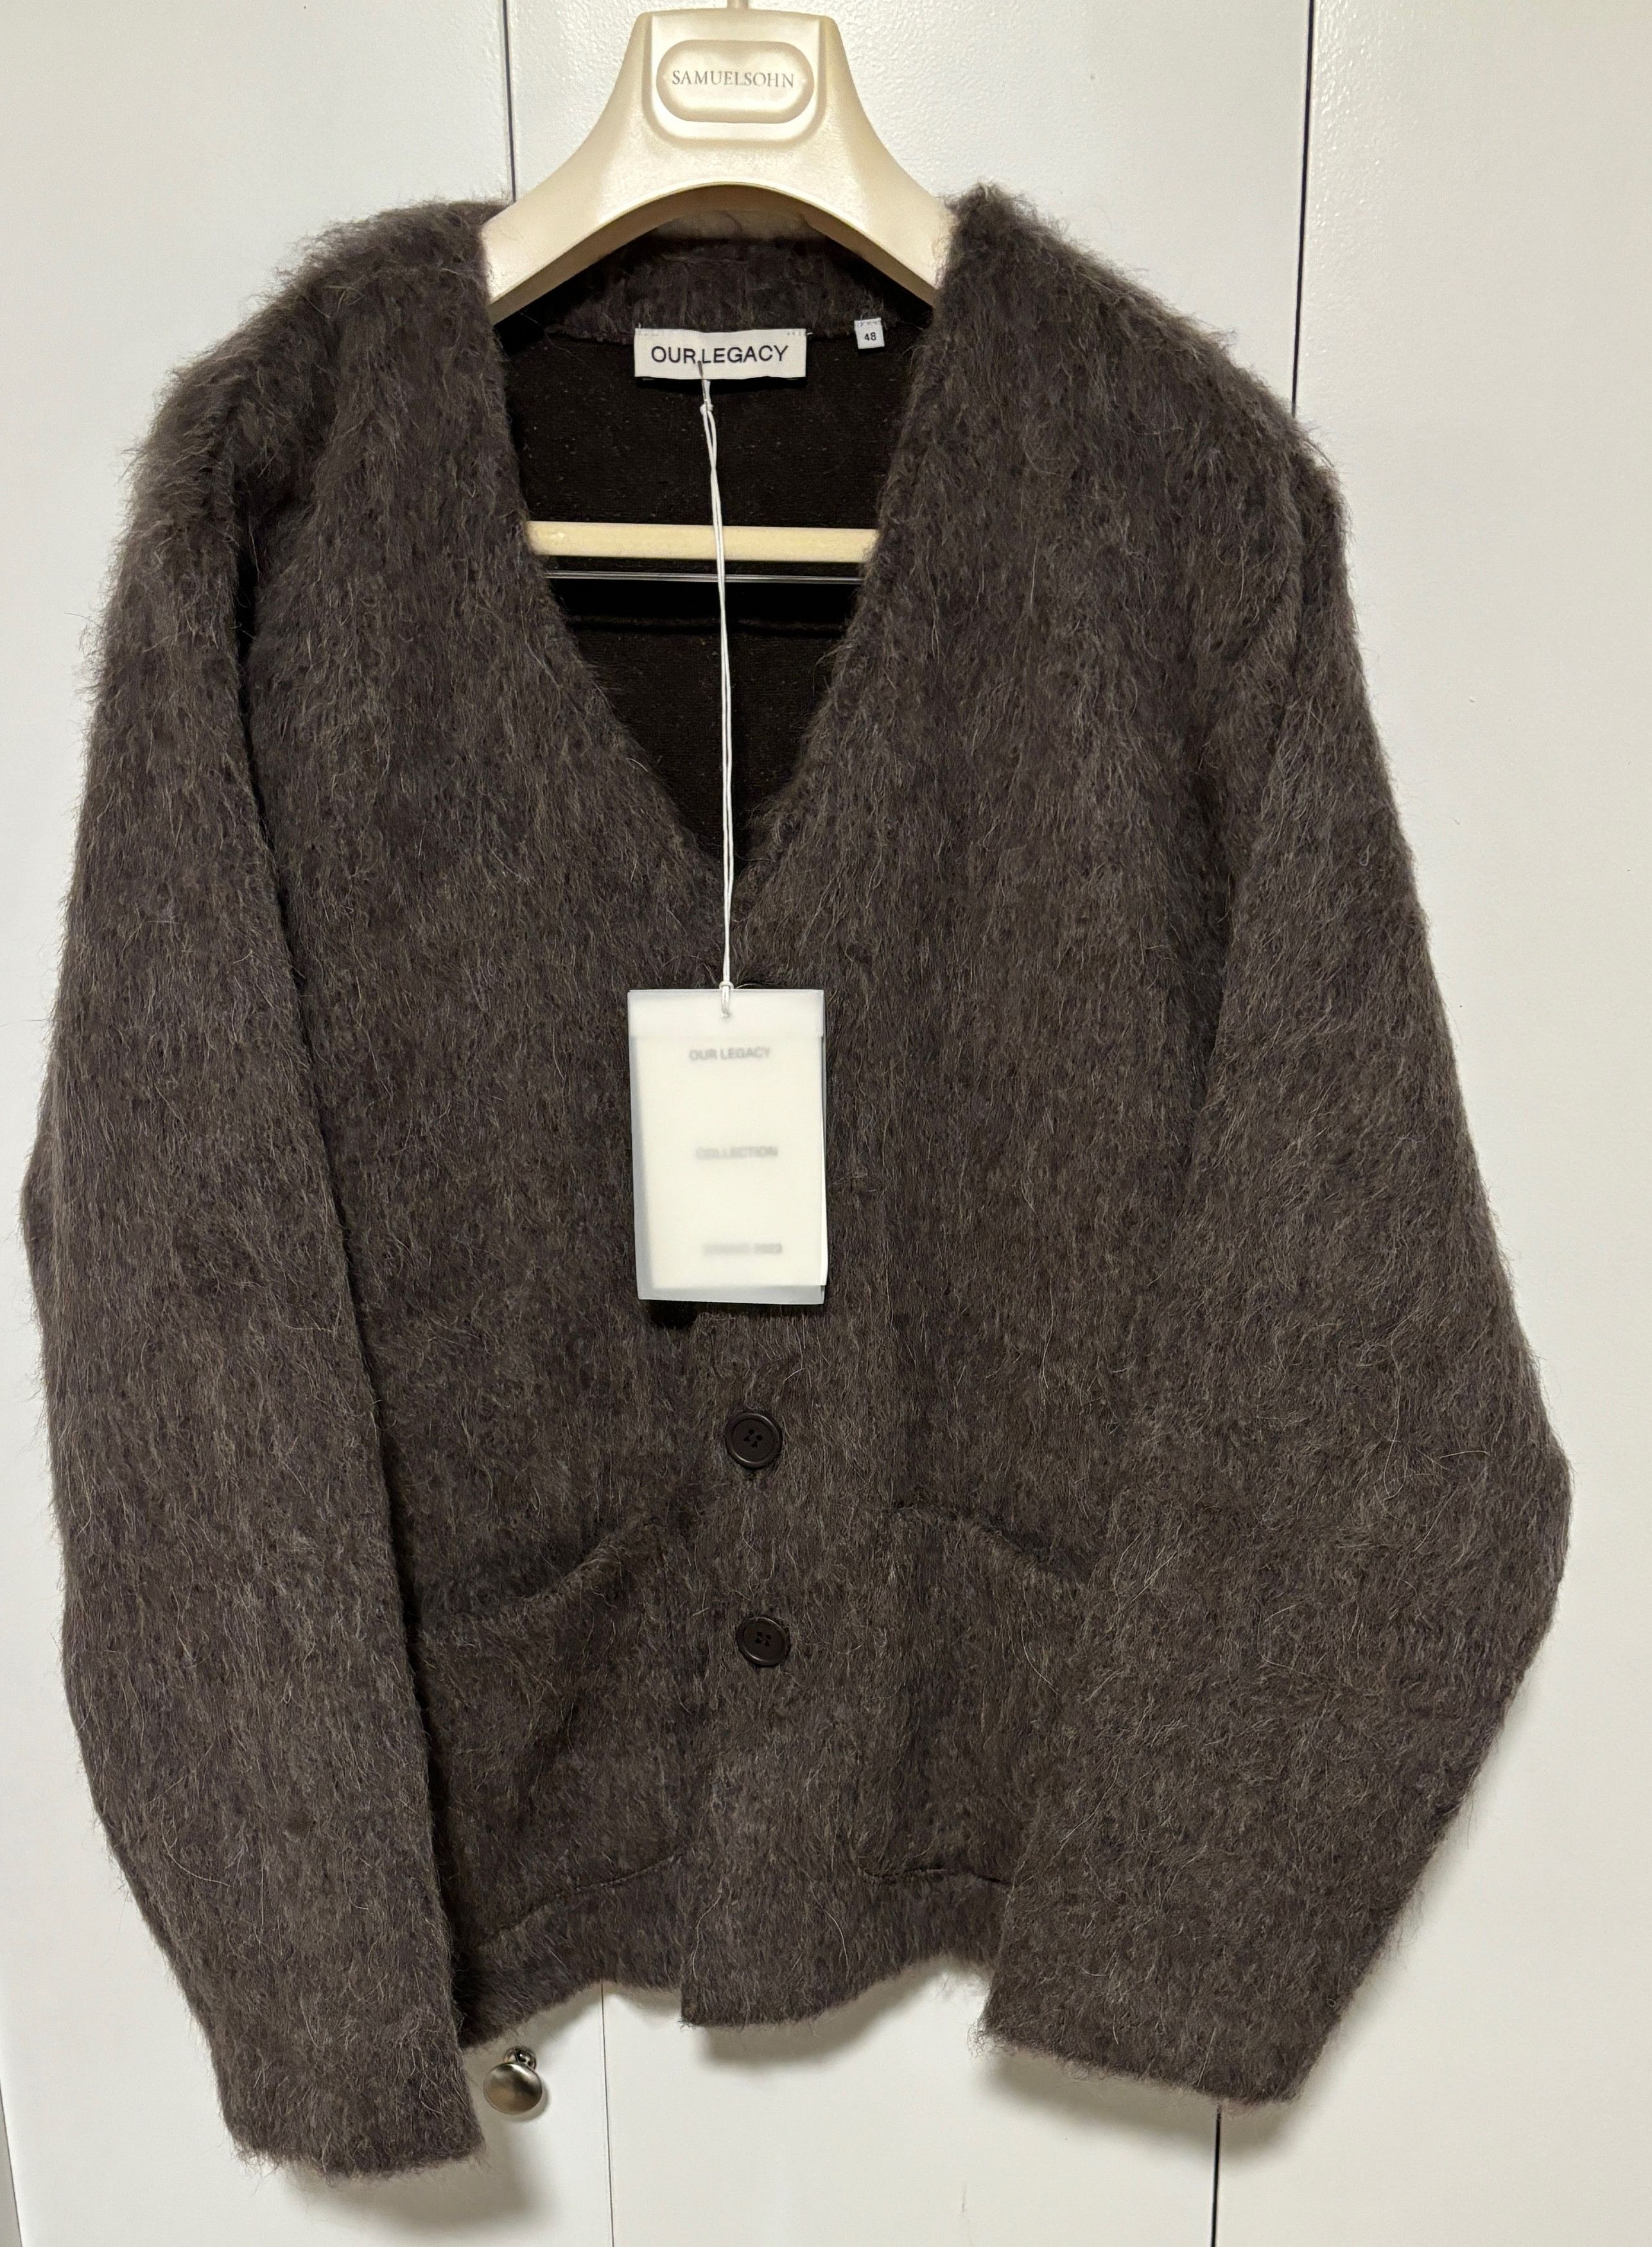 Our Legacy Our Legacy Mole Grey Mohair Cardigan 48 M-L | Grailed